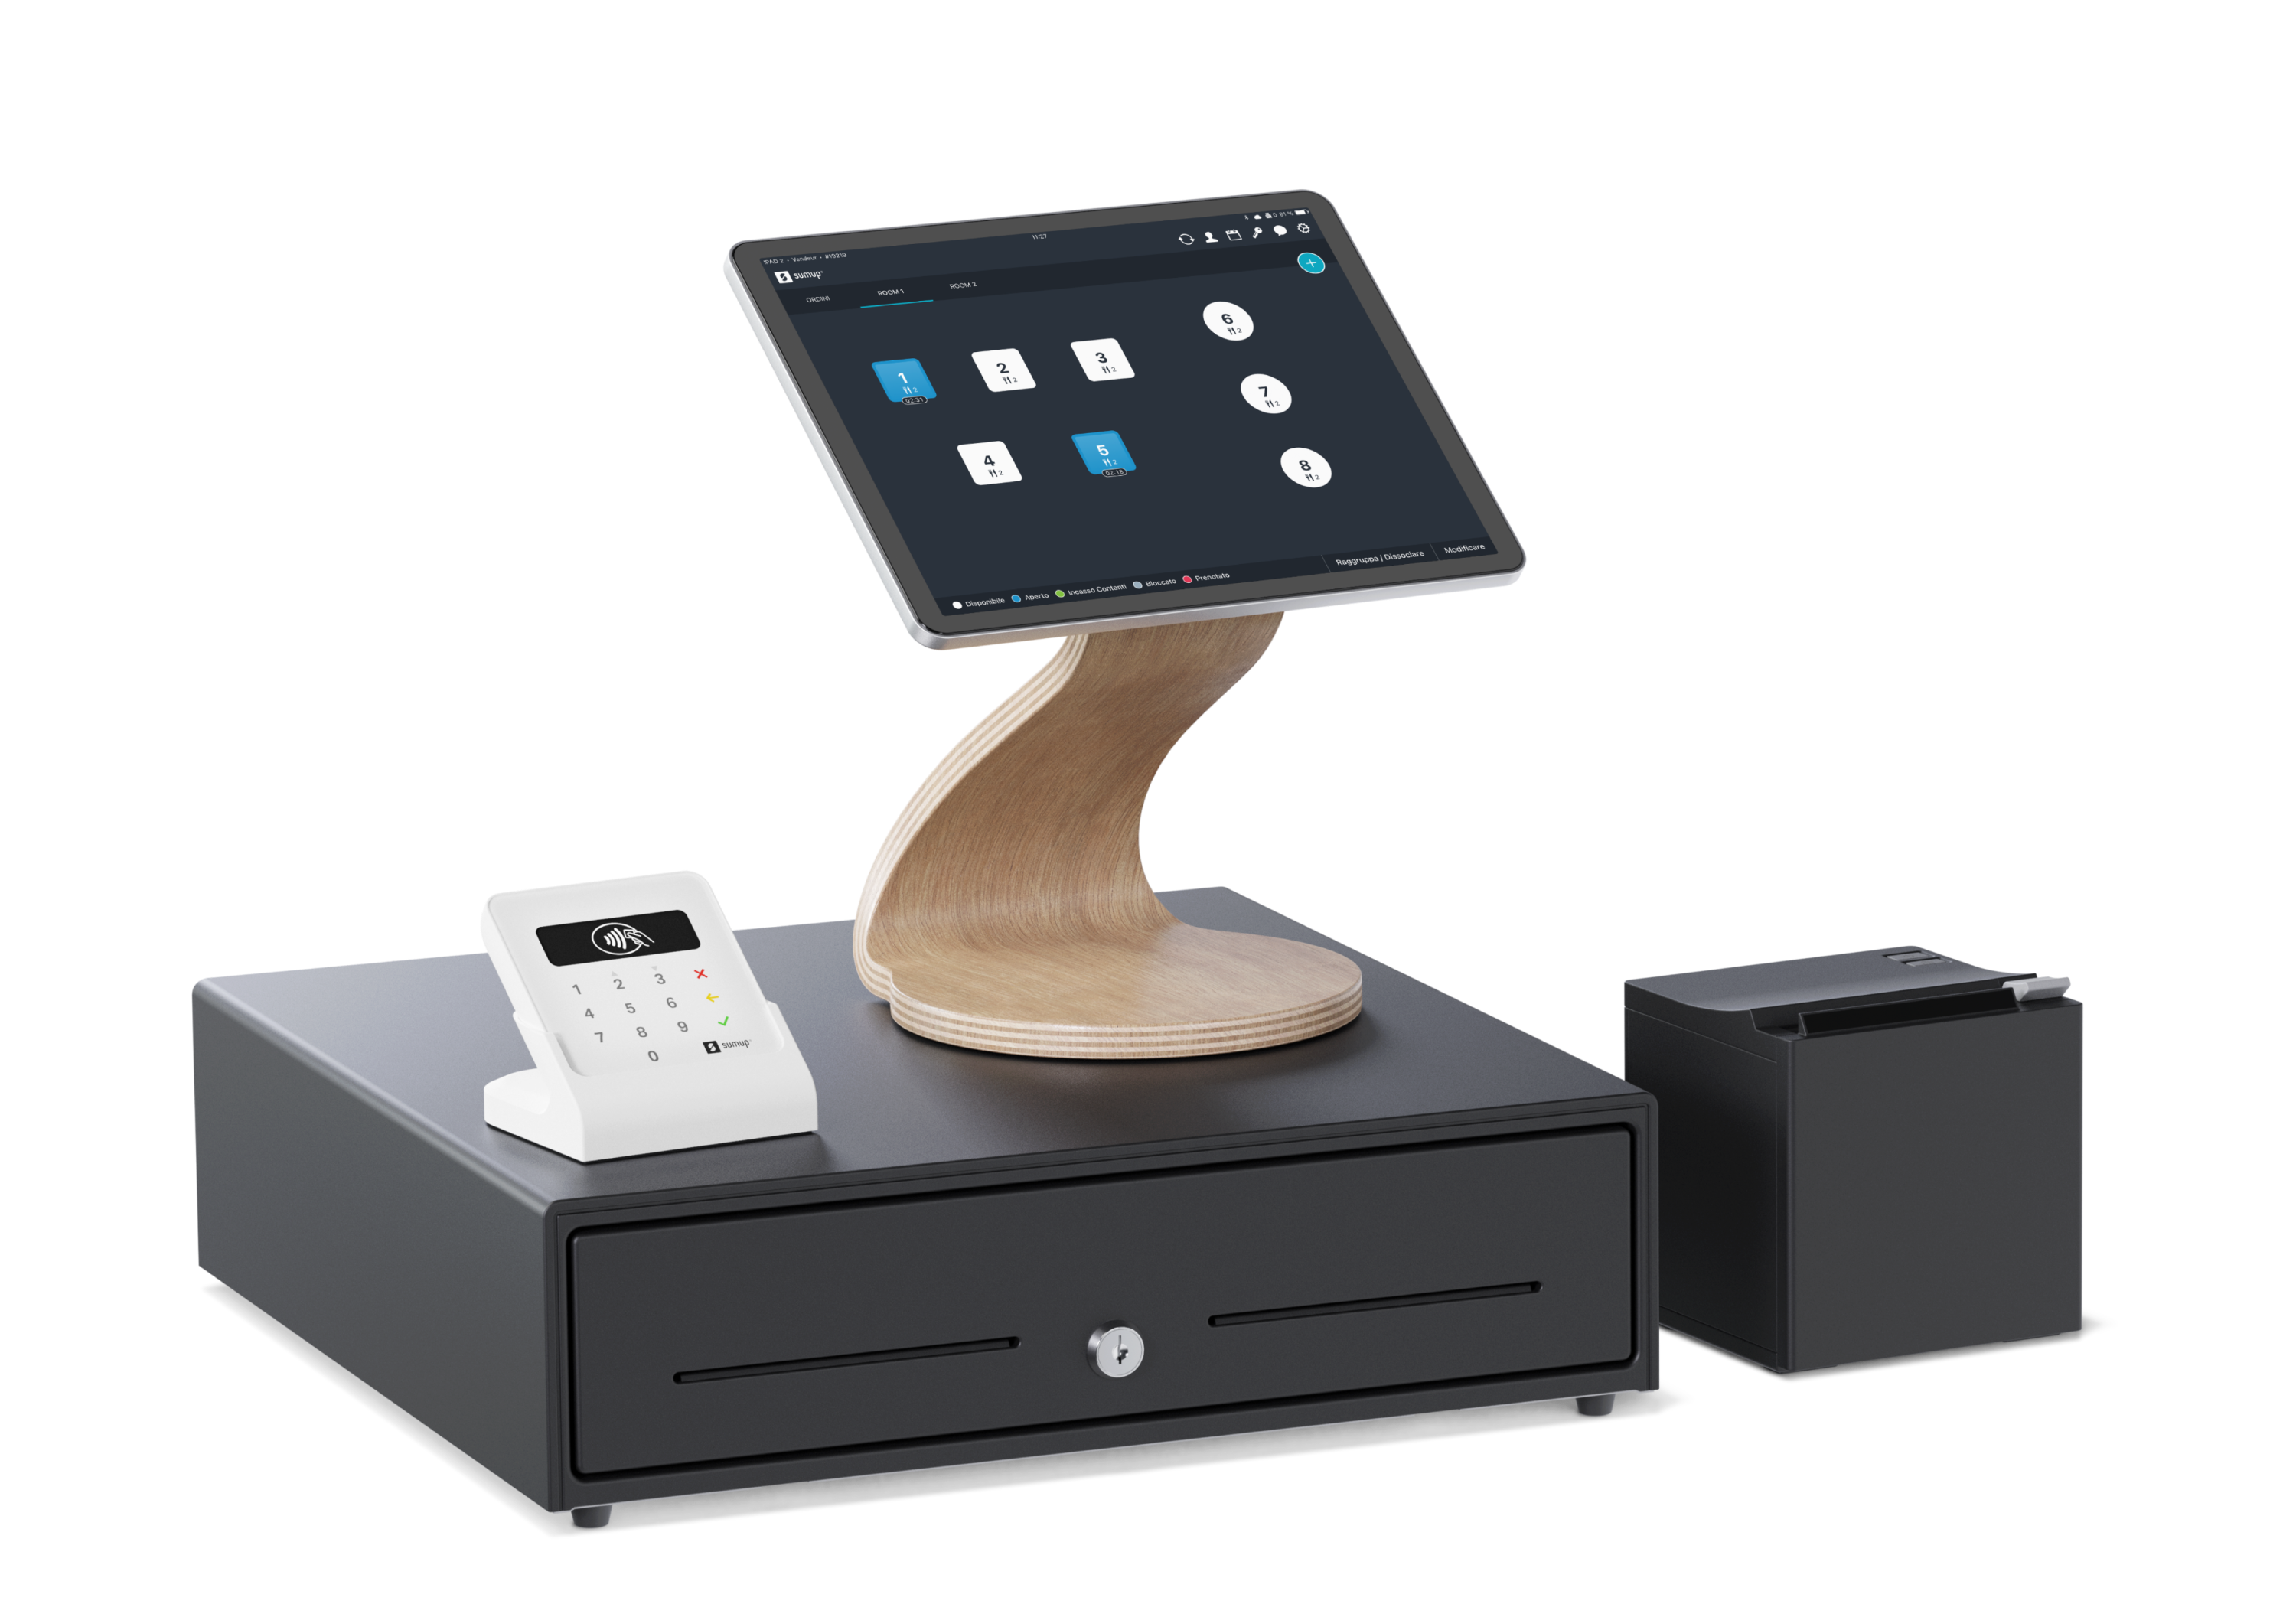 SumUp Point of Sale Lite: The new out-of-the-box point of sale system